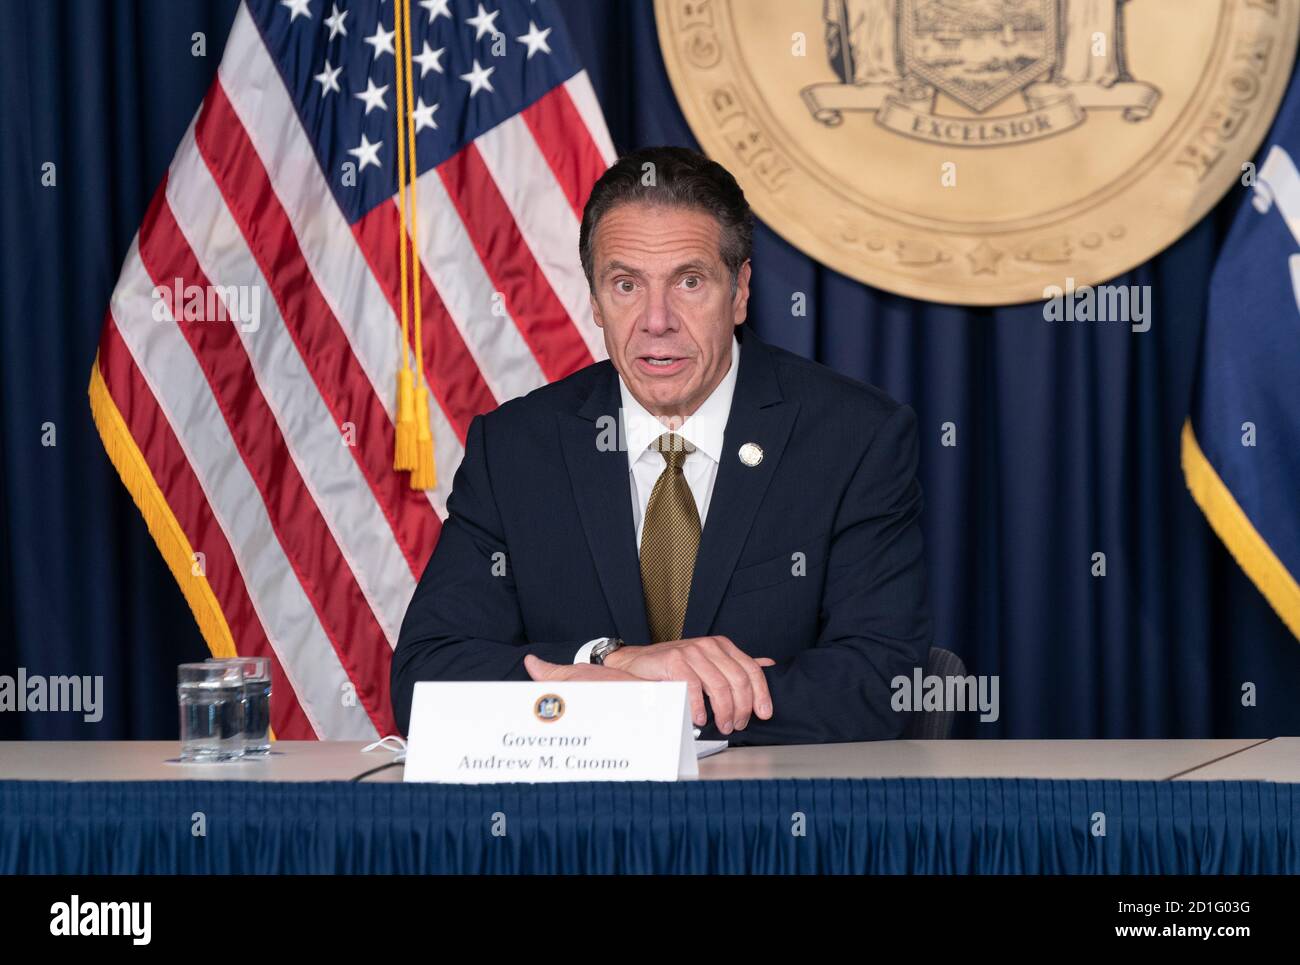 New York, NY - October 5, 2020: NYS Governor Andrew Cuomo makes daily media announcement and briefing at 633 3rd Avenue, Manhattan Stock Photo